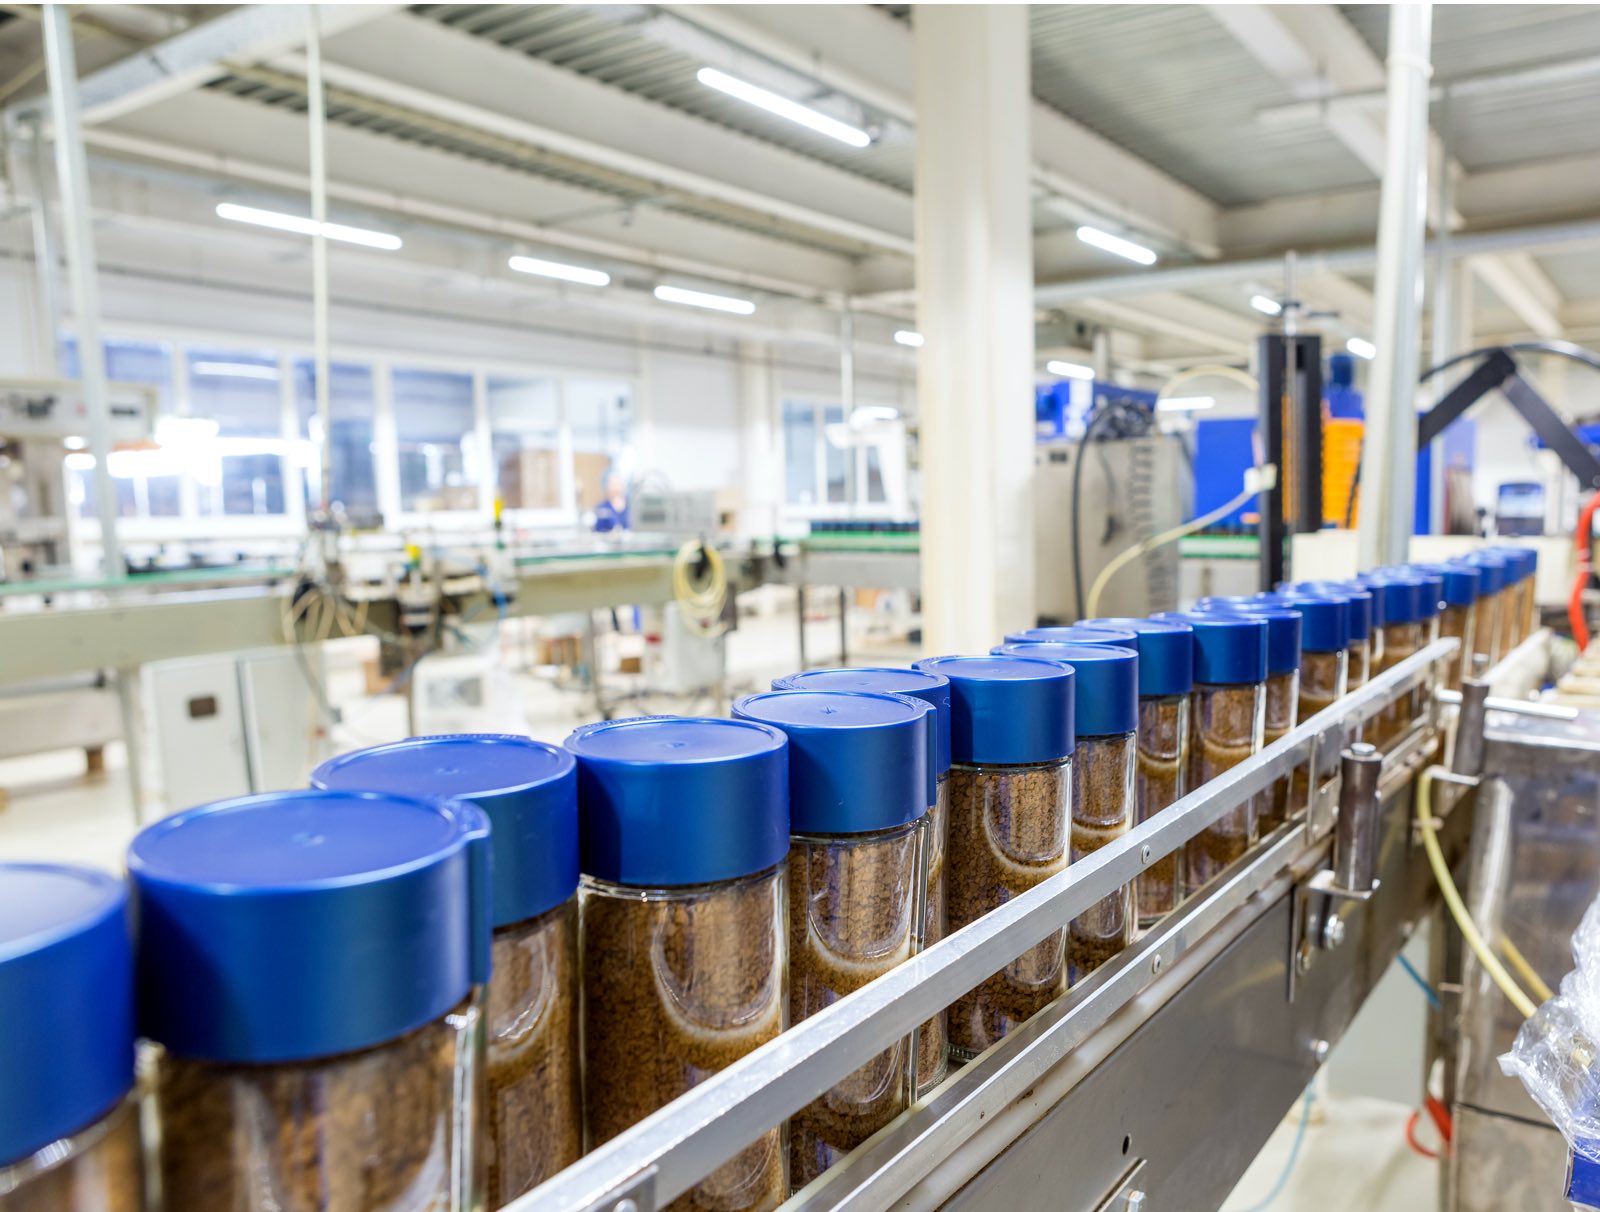 instant coffee containers over conveyor belt